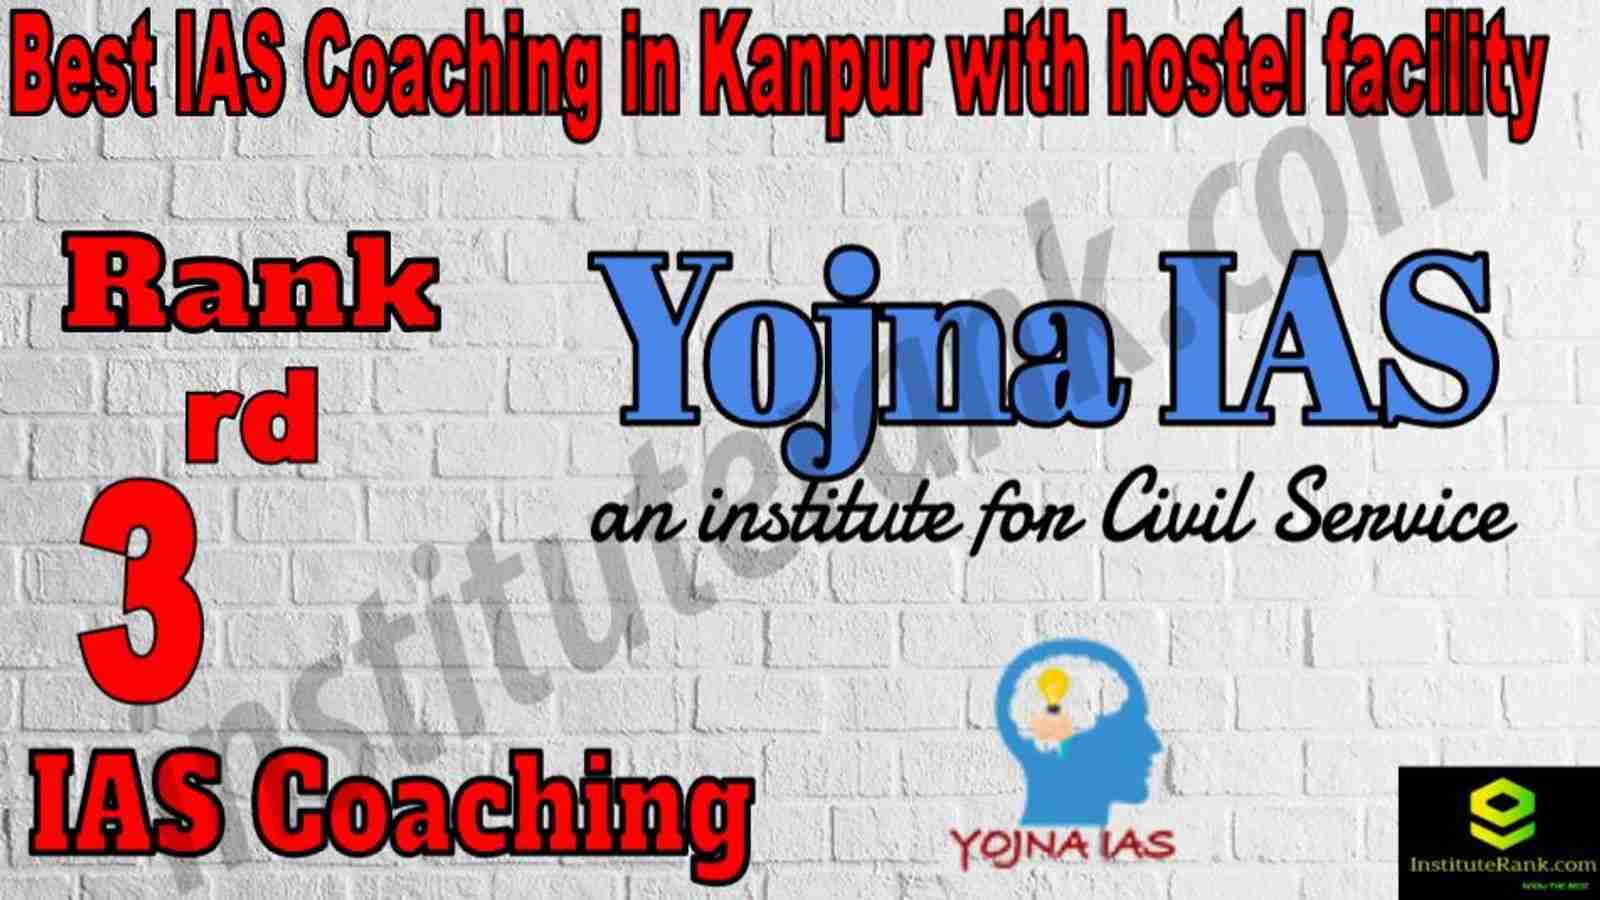 3rd Best IAS Coaching in Kanpur With hostel facility